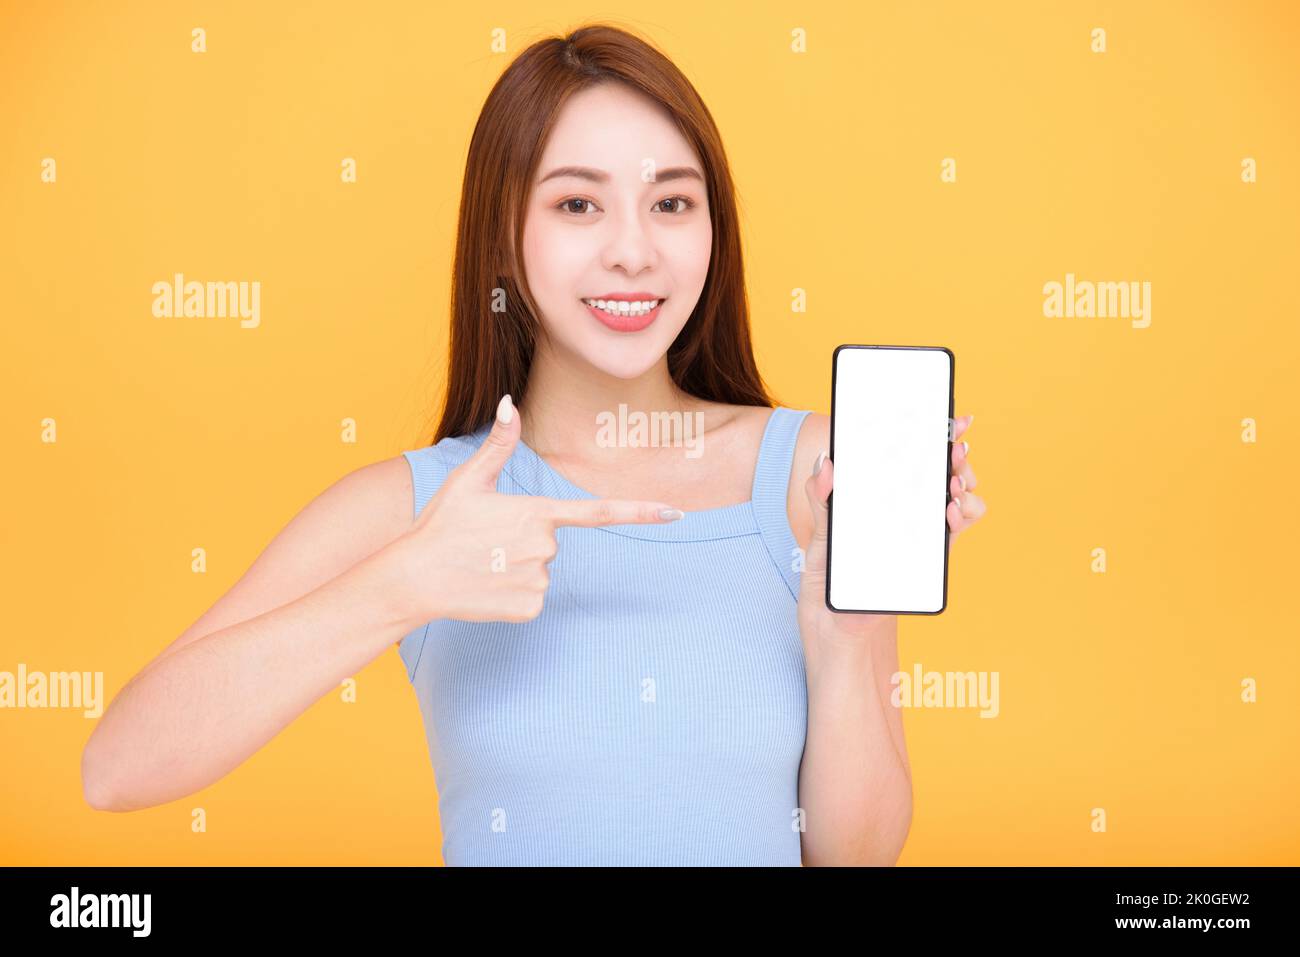 Happy asian woman showing mobile phone blank screen on yellow background Stock Photo